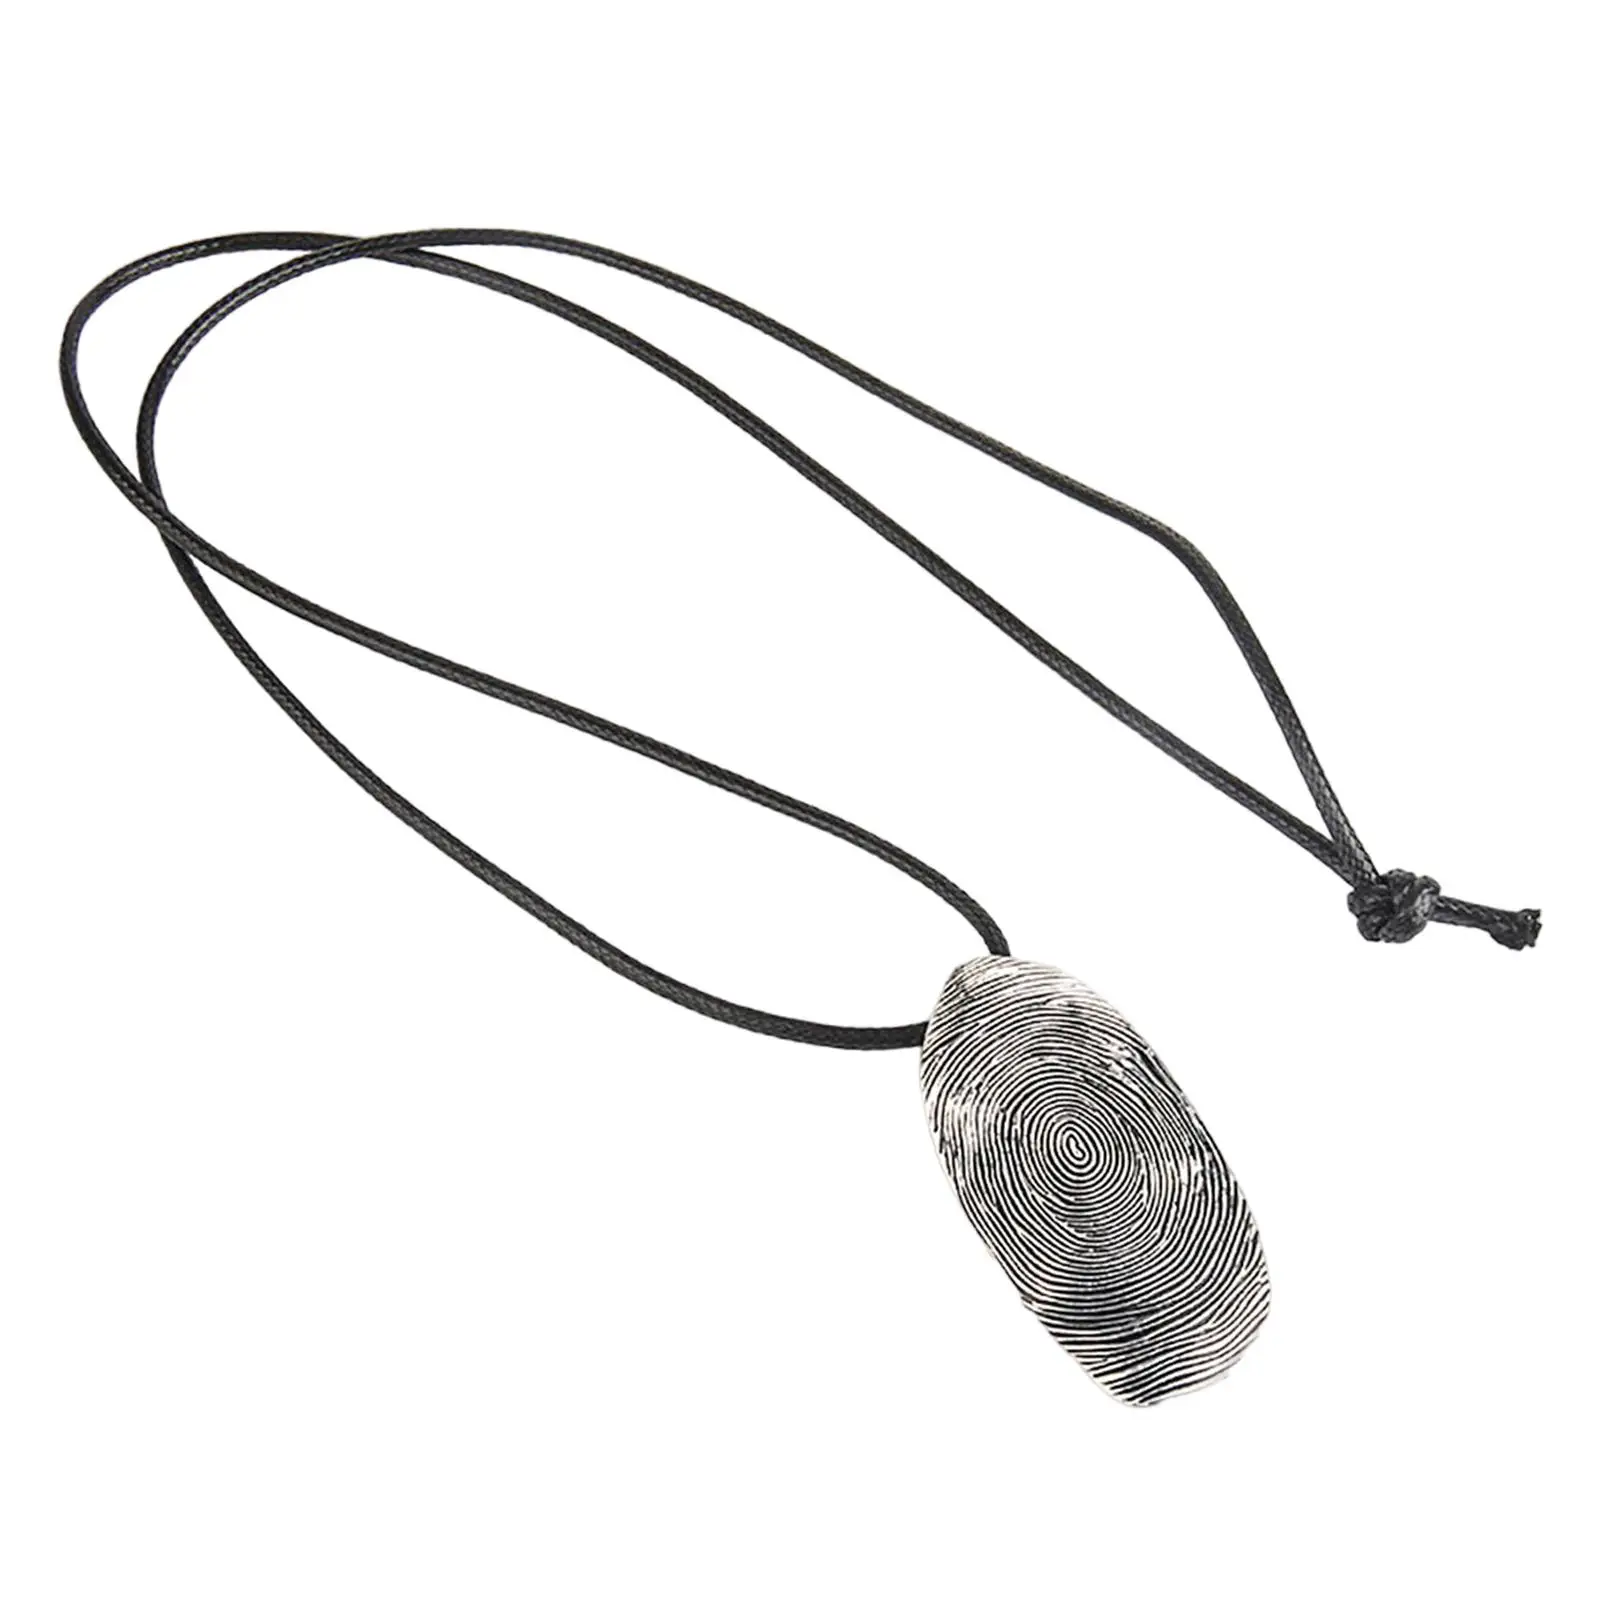 Trendy Fingerprint Pendant Necklace Fashion Decorative Long Cord Creative Necklace for Men Women Anniversary Daily Work Holiday